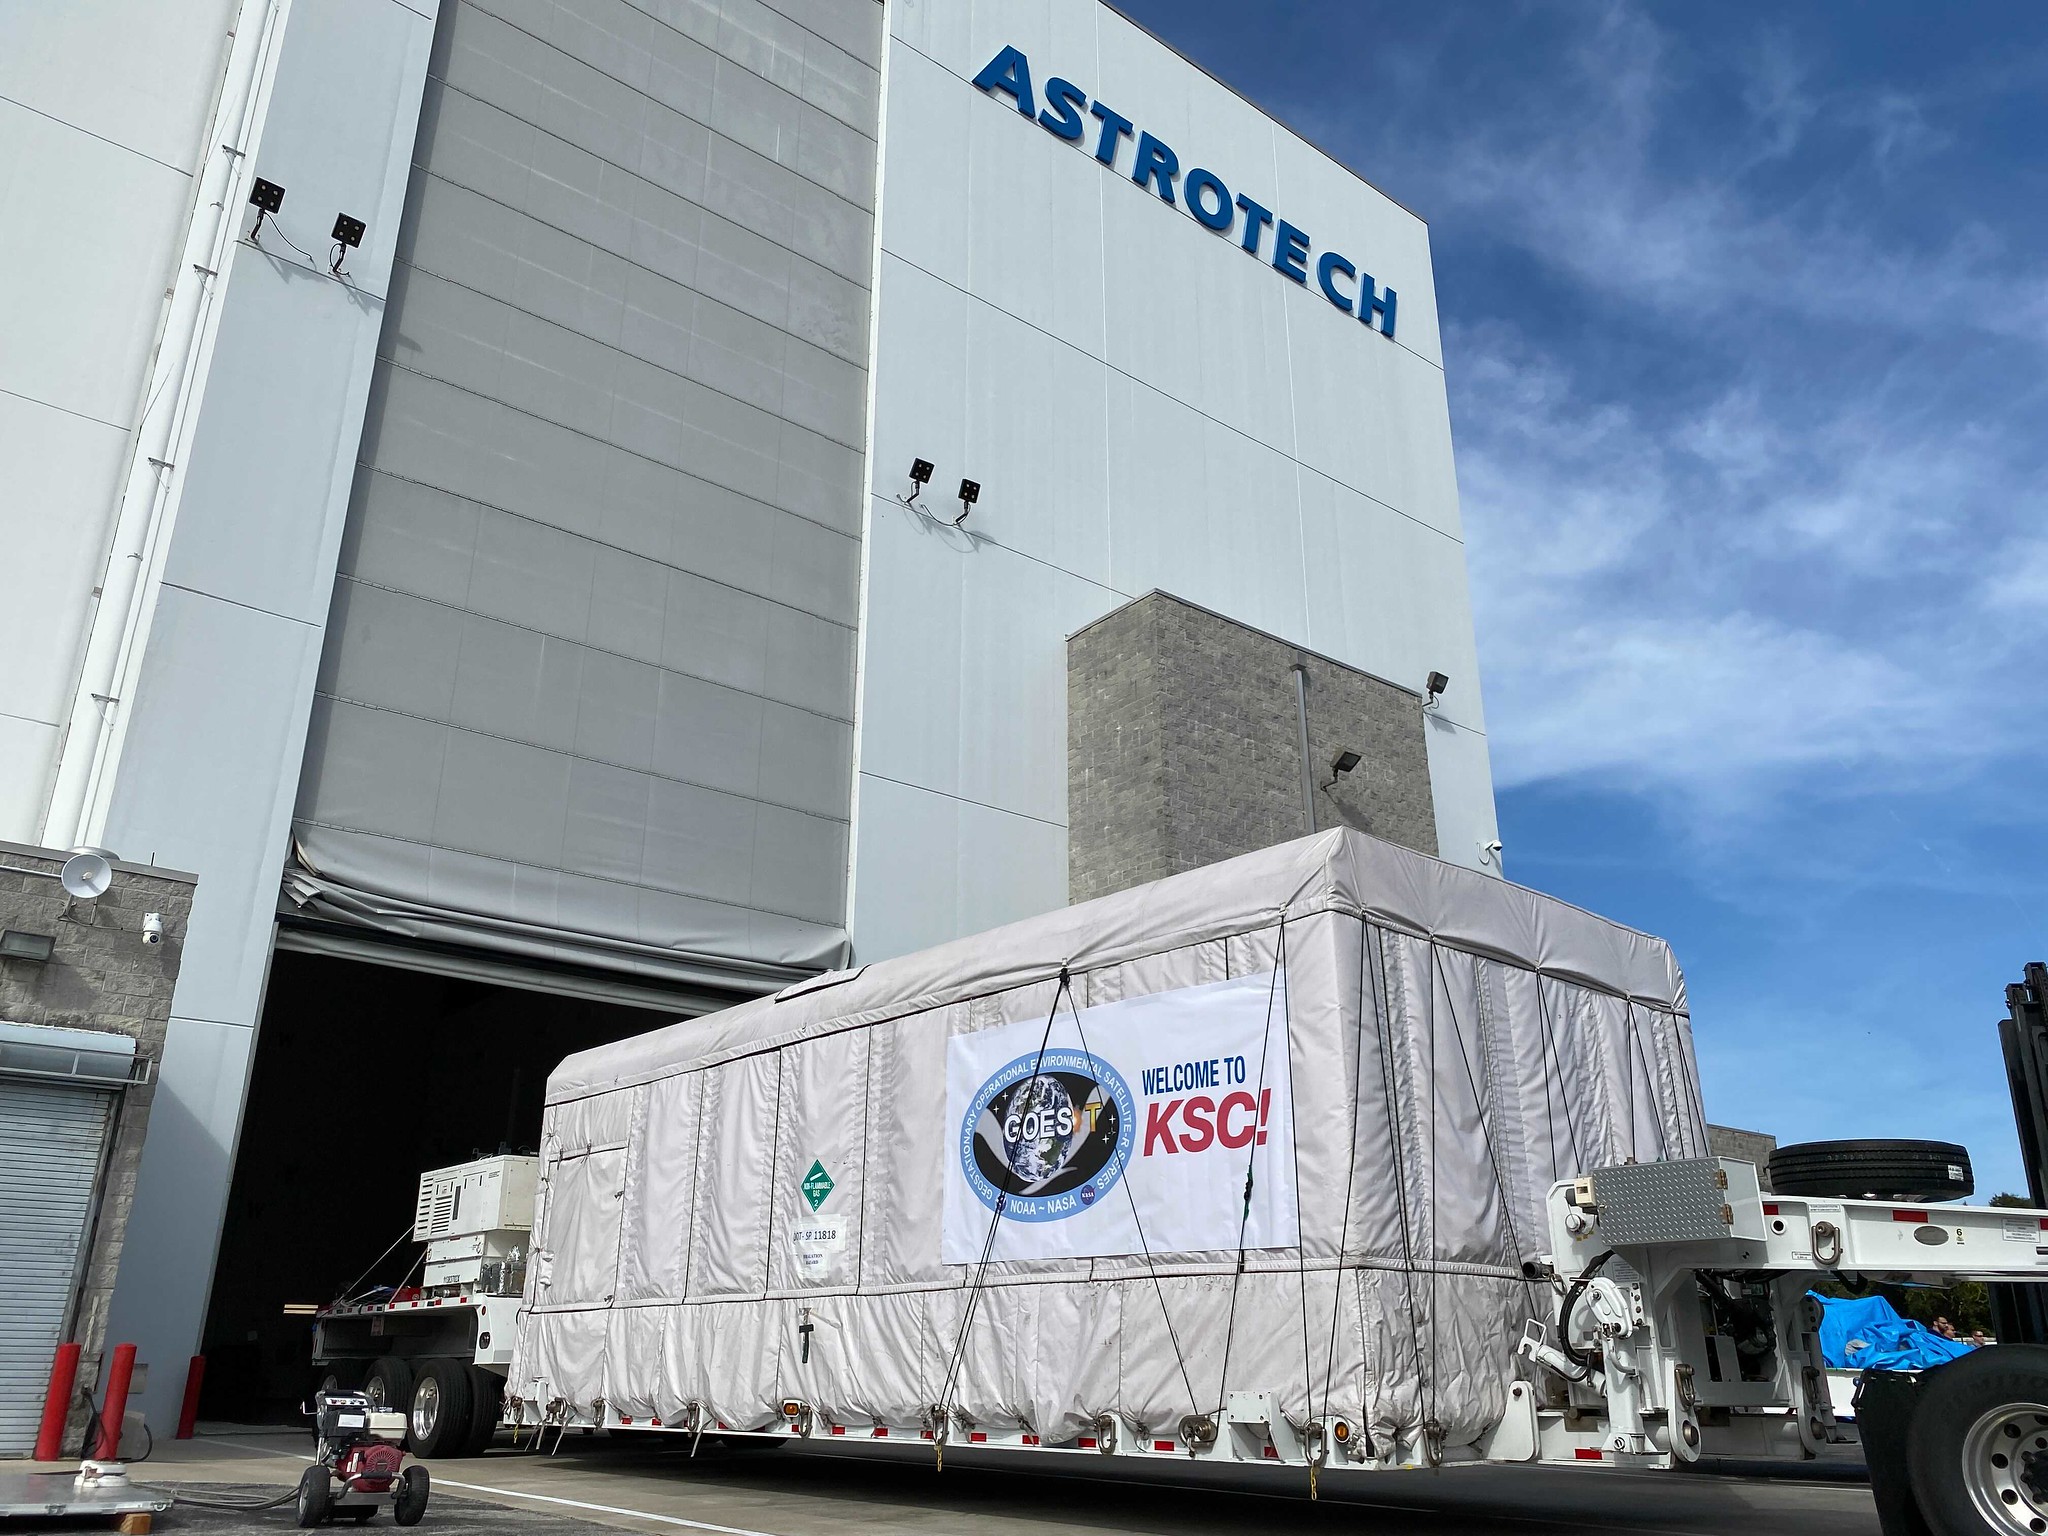 Goes-T satellite shipping container backing in to Astrotech Fl Building 9 Airlock
Photo: NASA